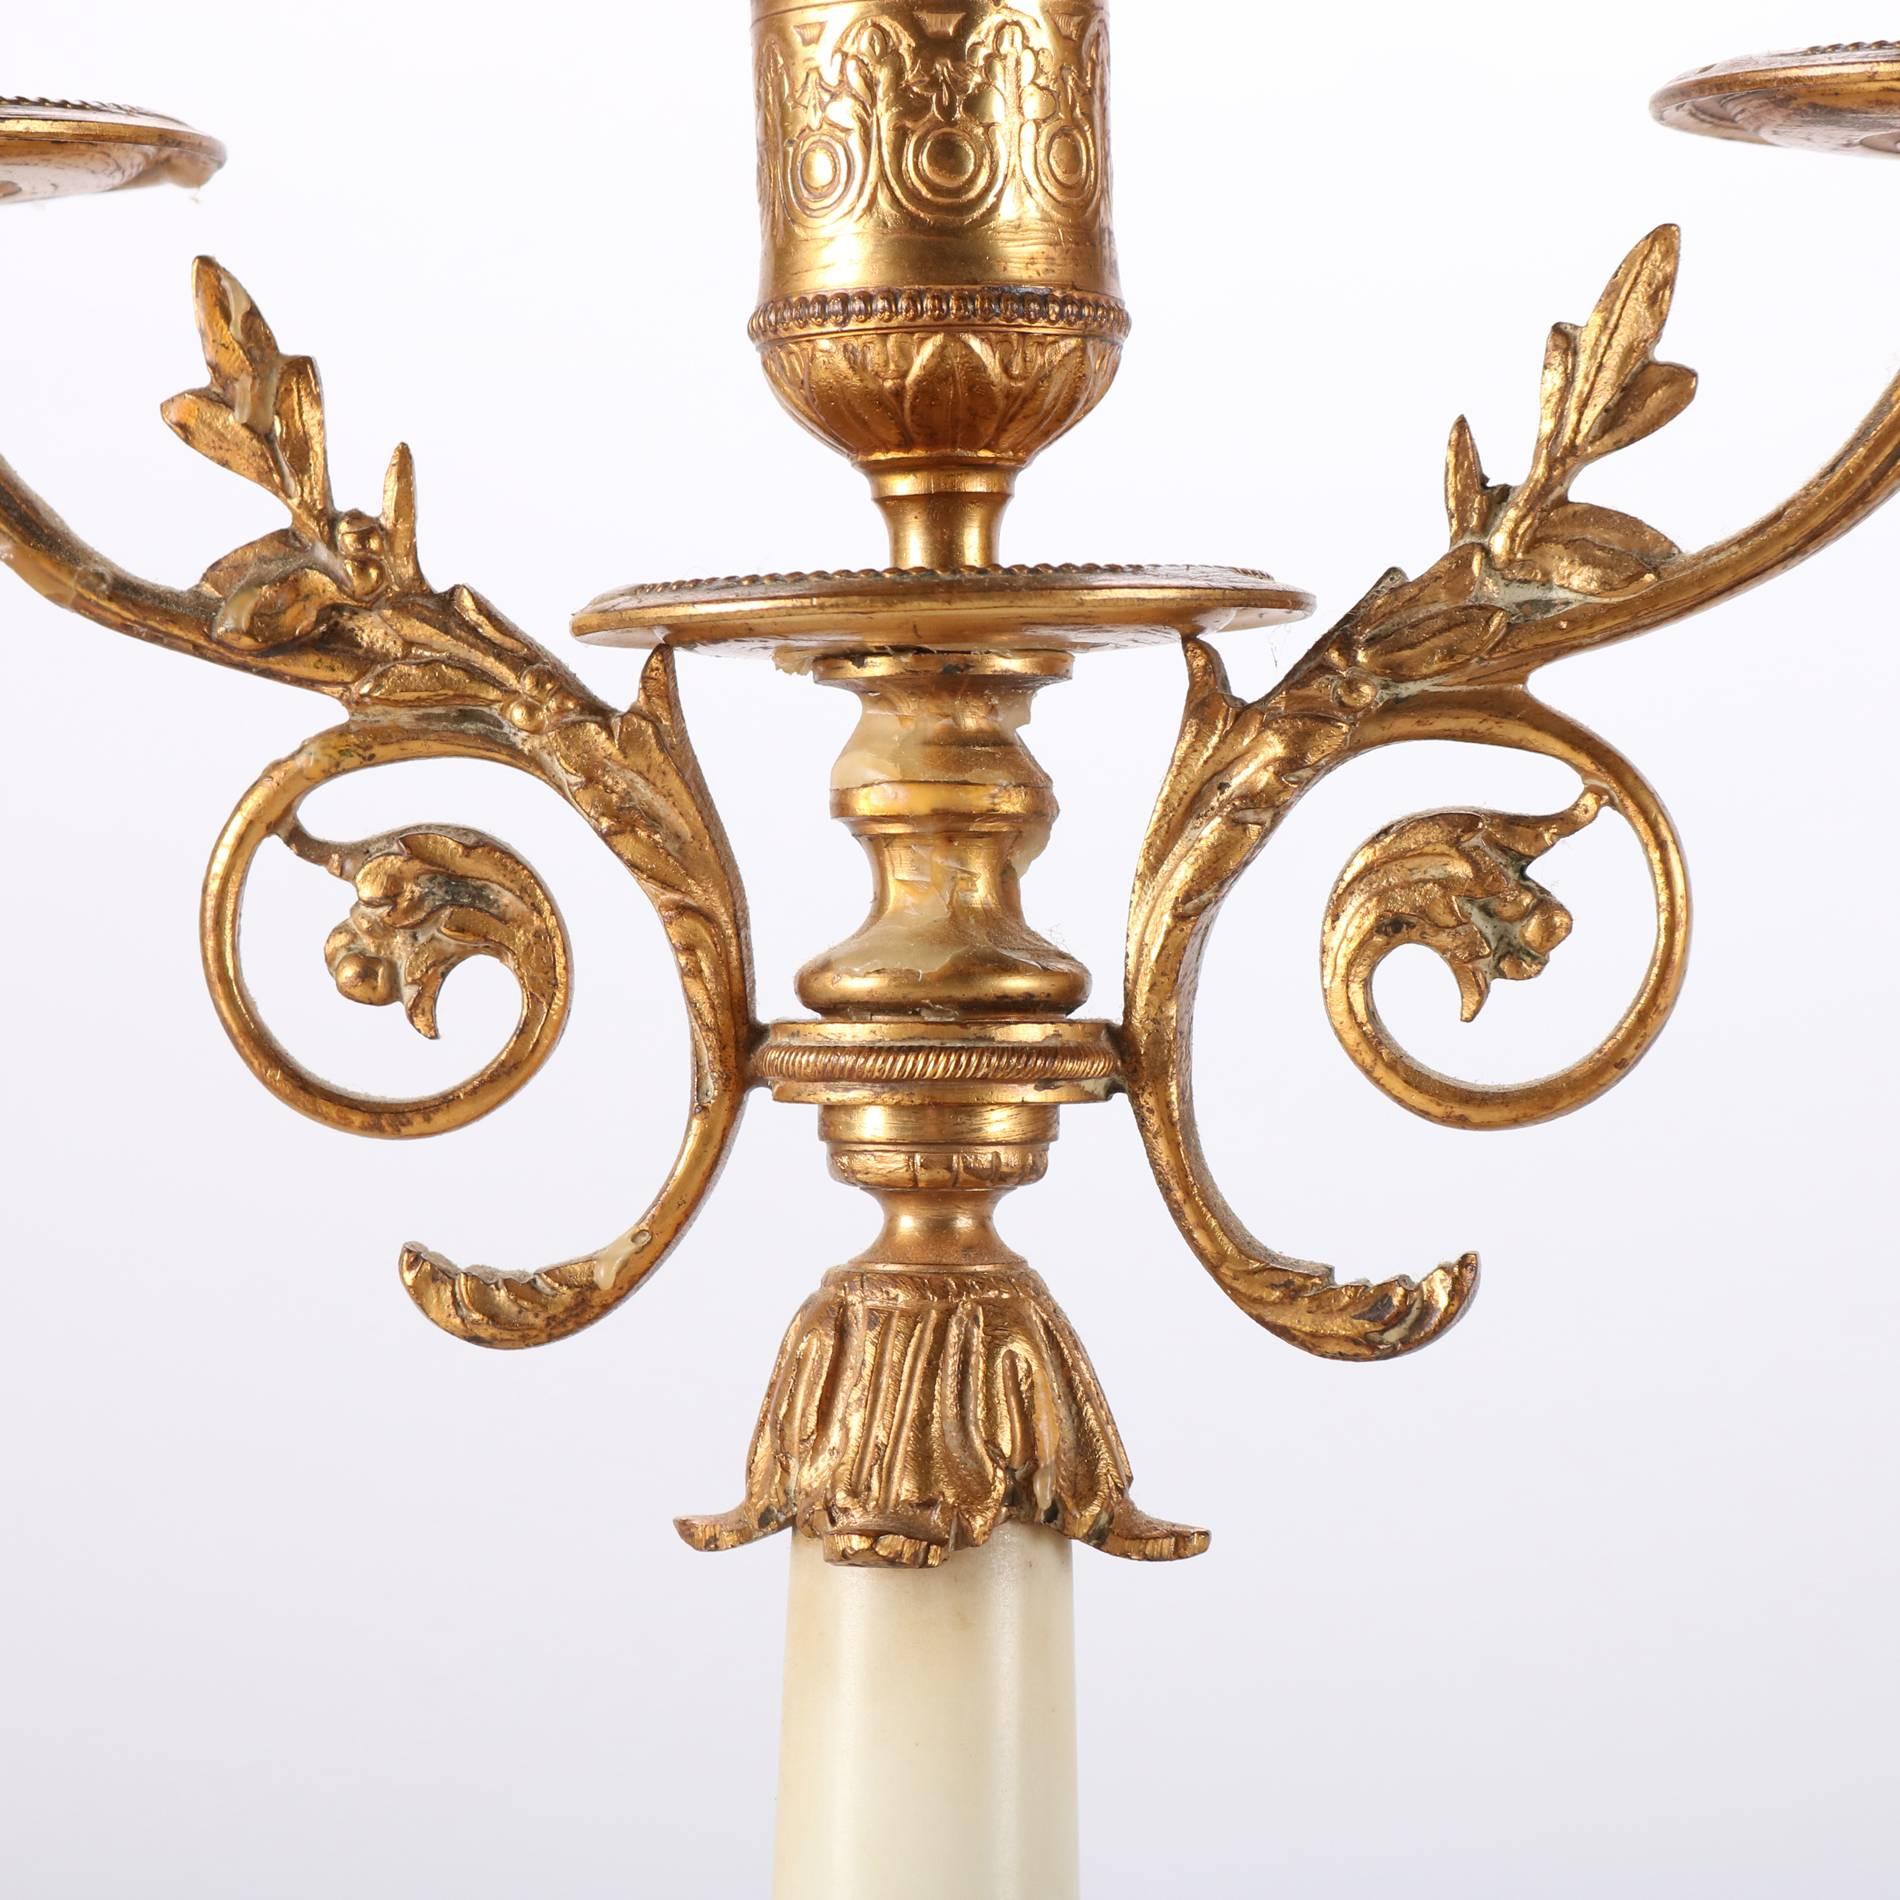 Pair of antique French gilt bronze classical candelabra feature three scroll and foliate form arms terminating in candle receivers, marble column and base each seated on four gilt bronze feet, 20th century

Measure: 12